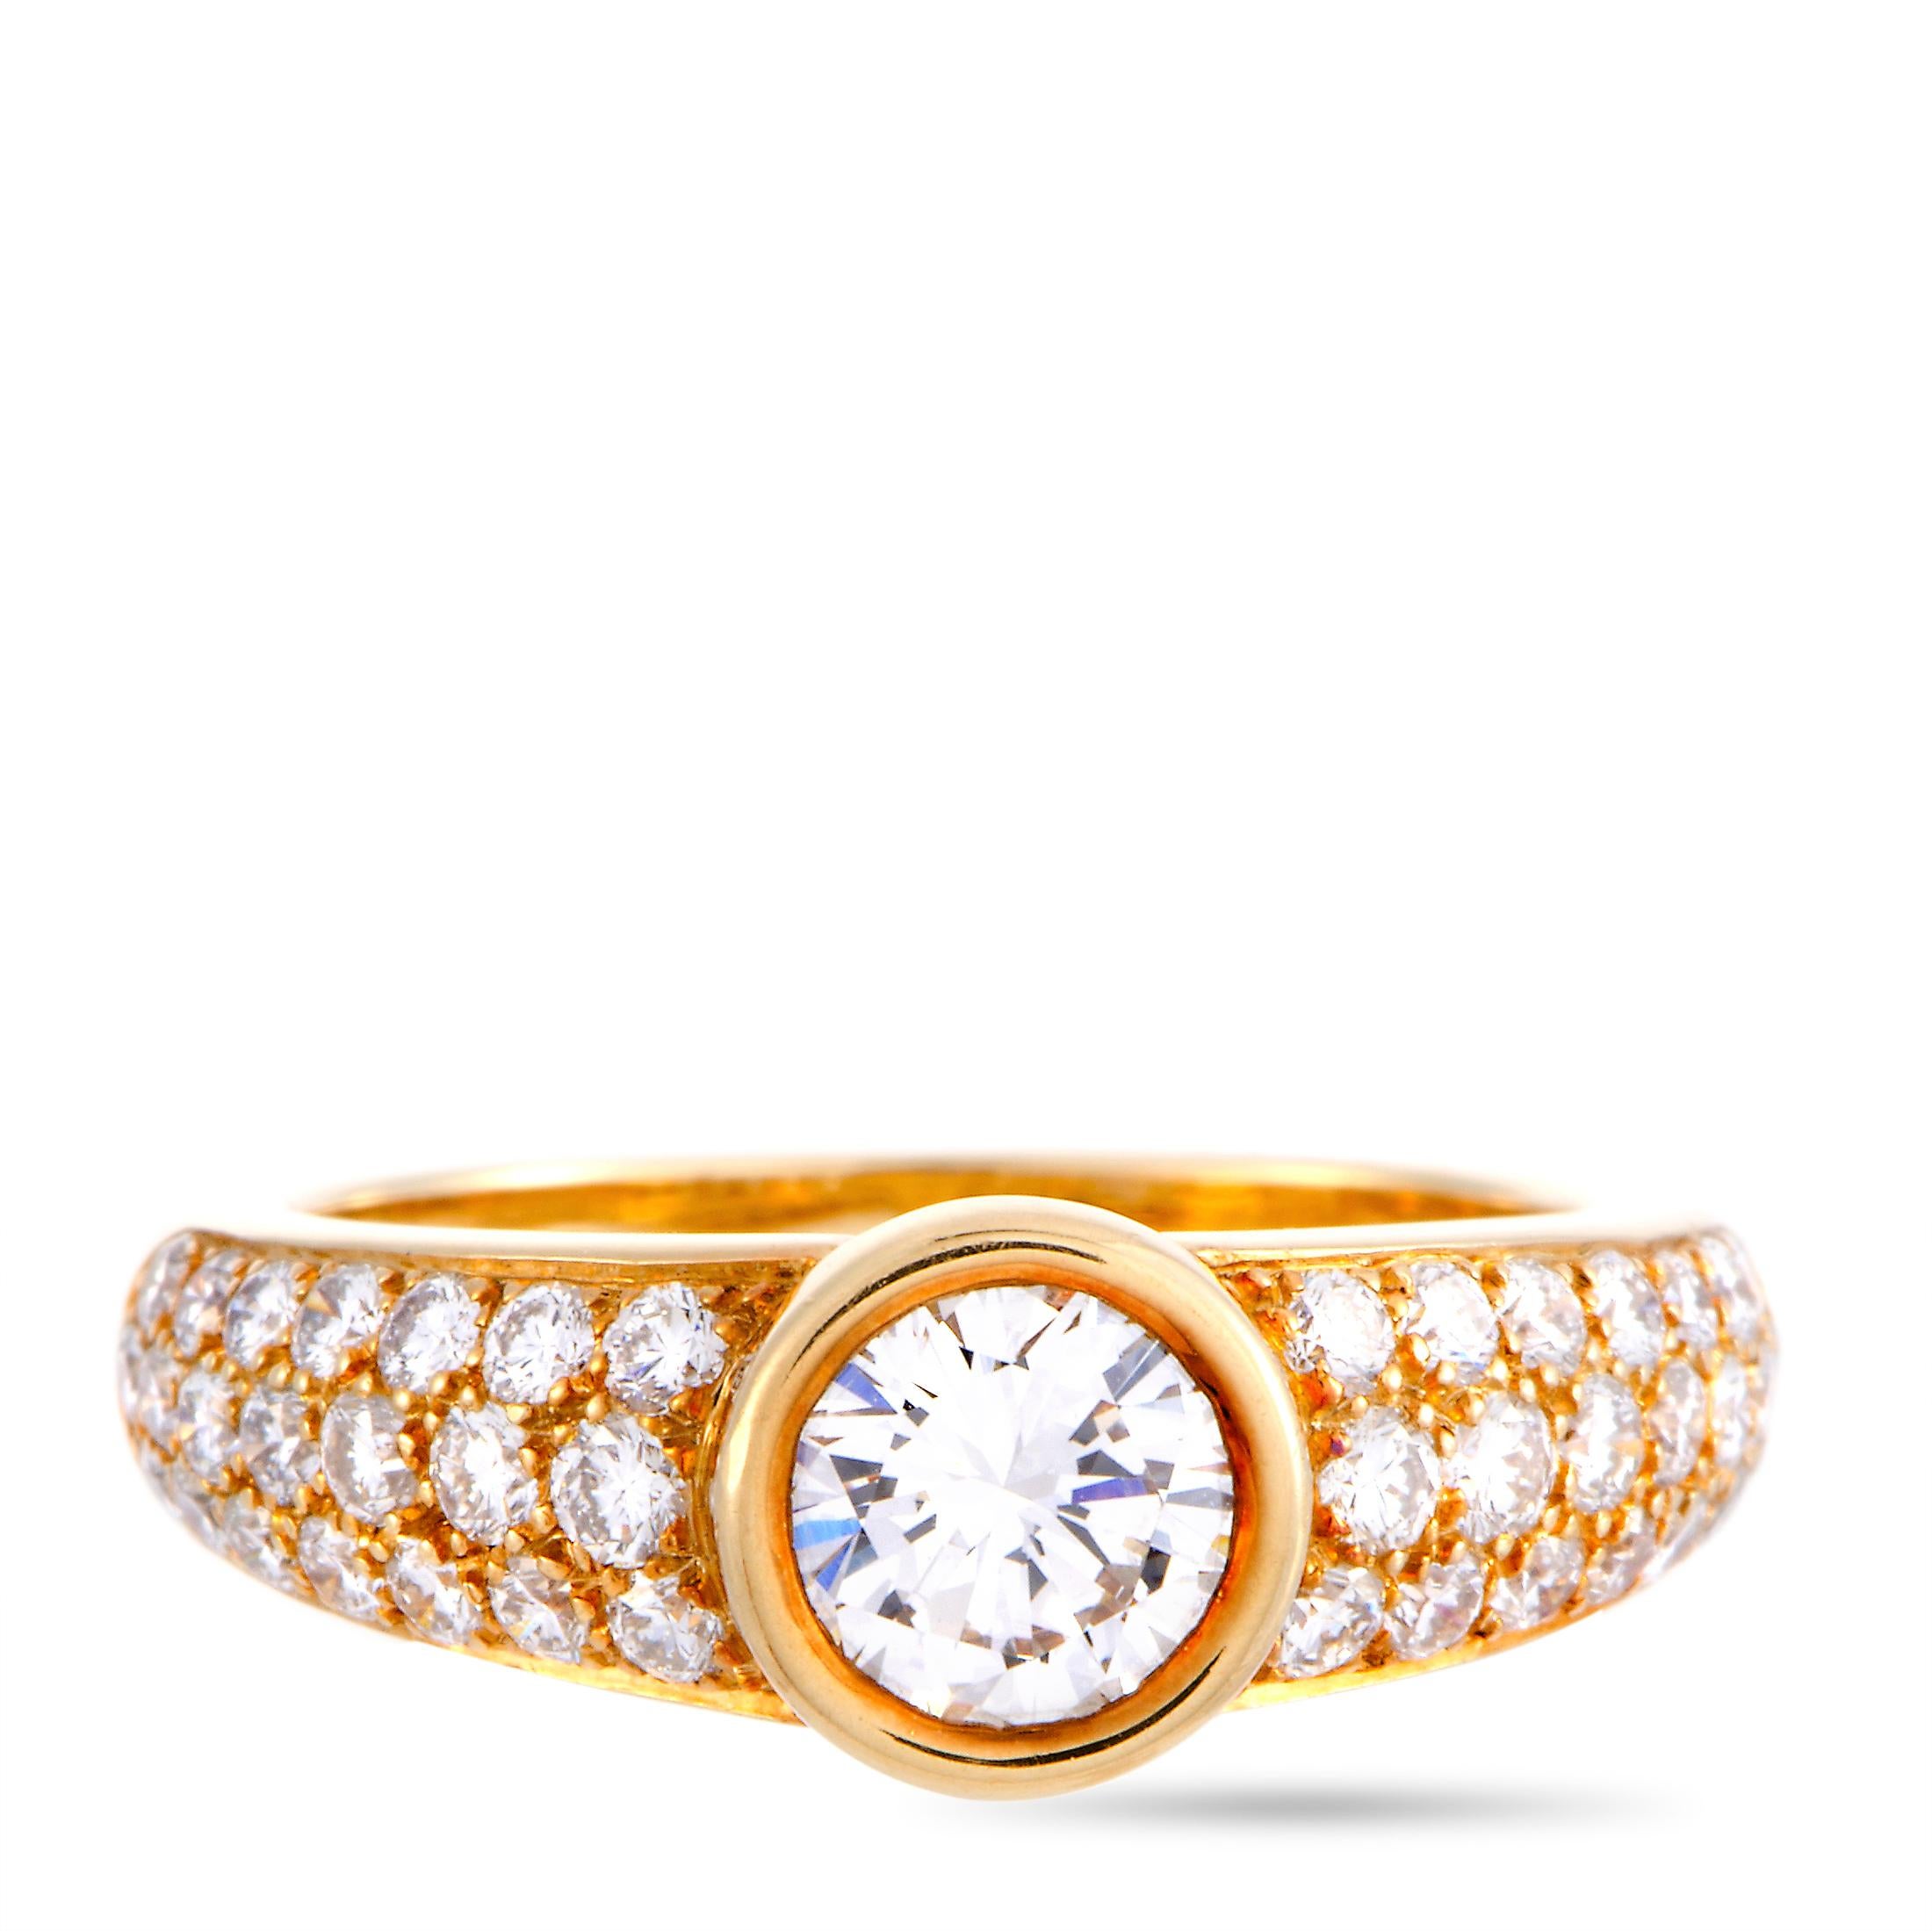 Women's Cartier Diamond Pave Yellow Gold Engagement Ring